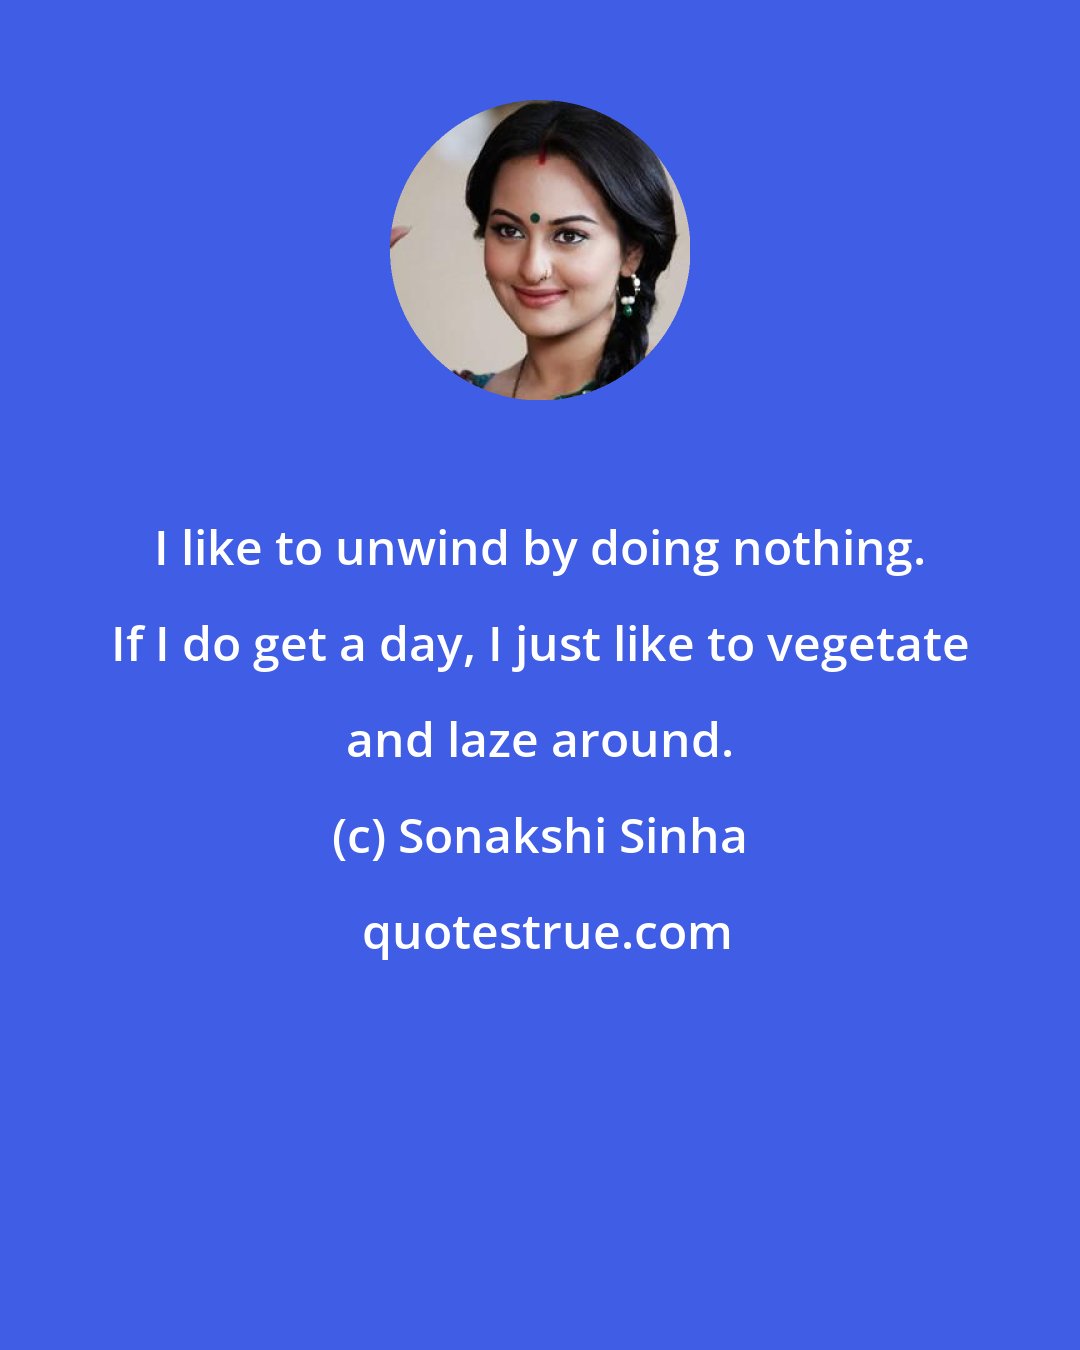 Sonakshi Sinha: I like to unwind by doing nothing. If I do get a day, I just like to vegetate and laze around.